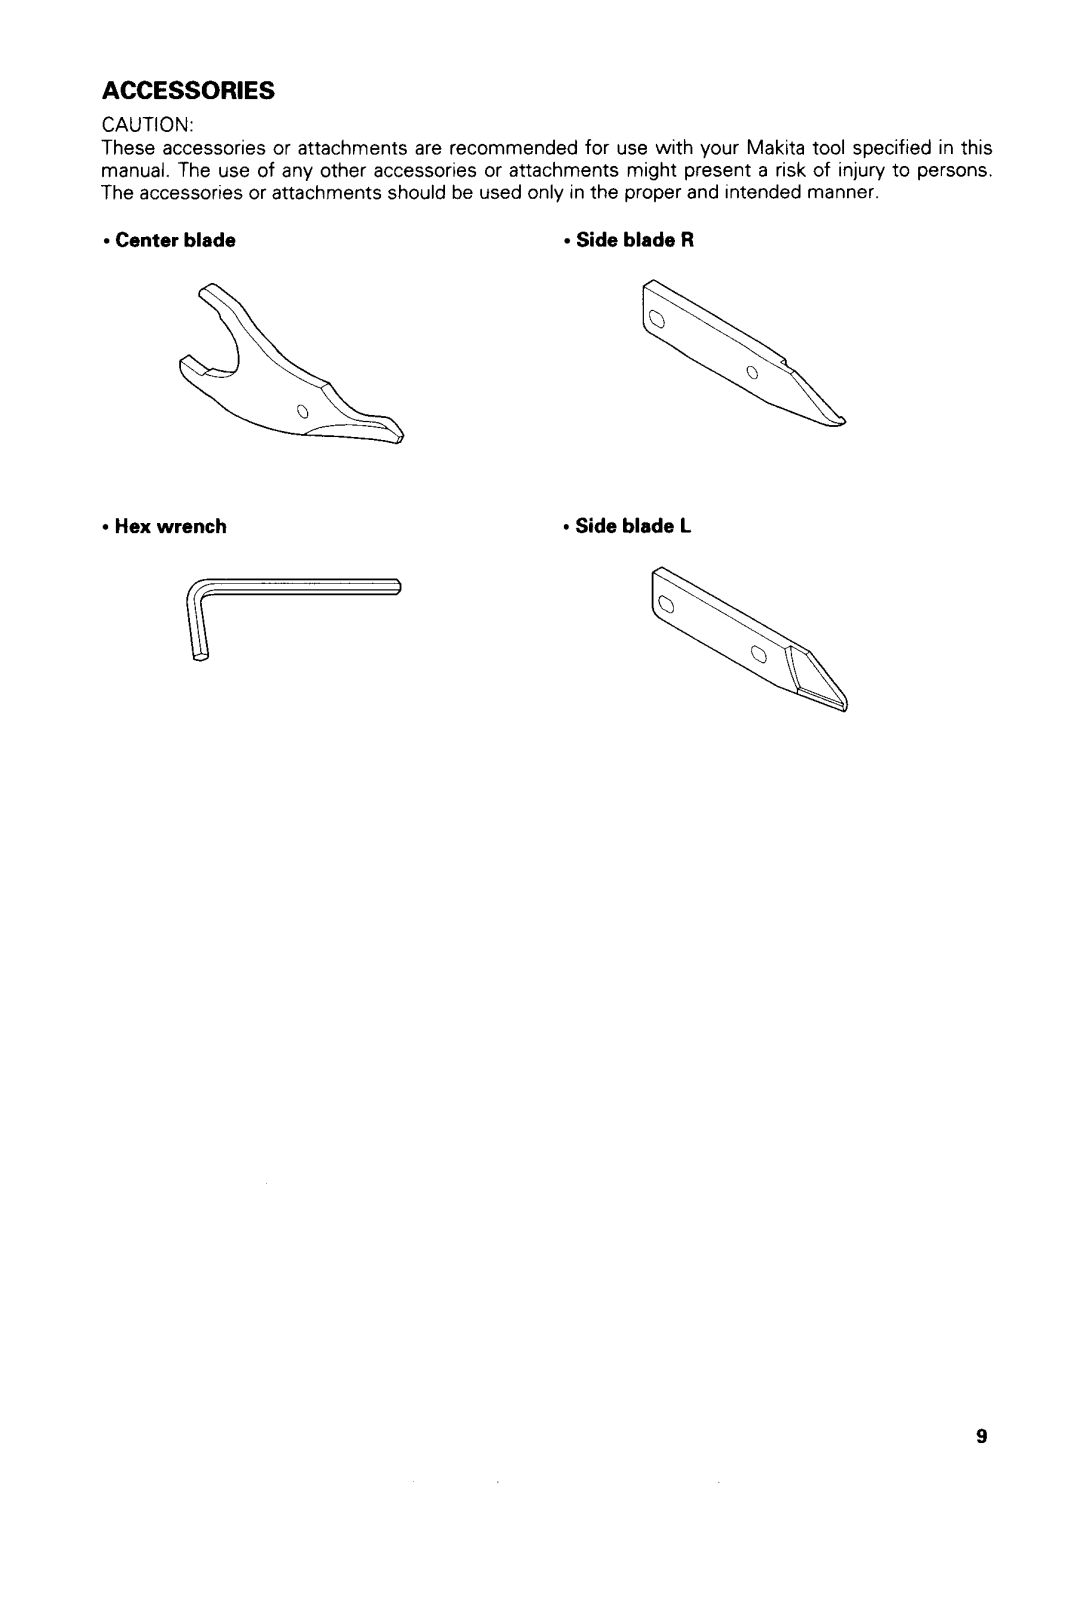 Makita WLAR-L11-L Accessories, tool specified in this of injury to persons manner, Center blade, Hex wrench, Side blade R 